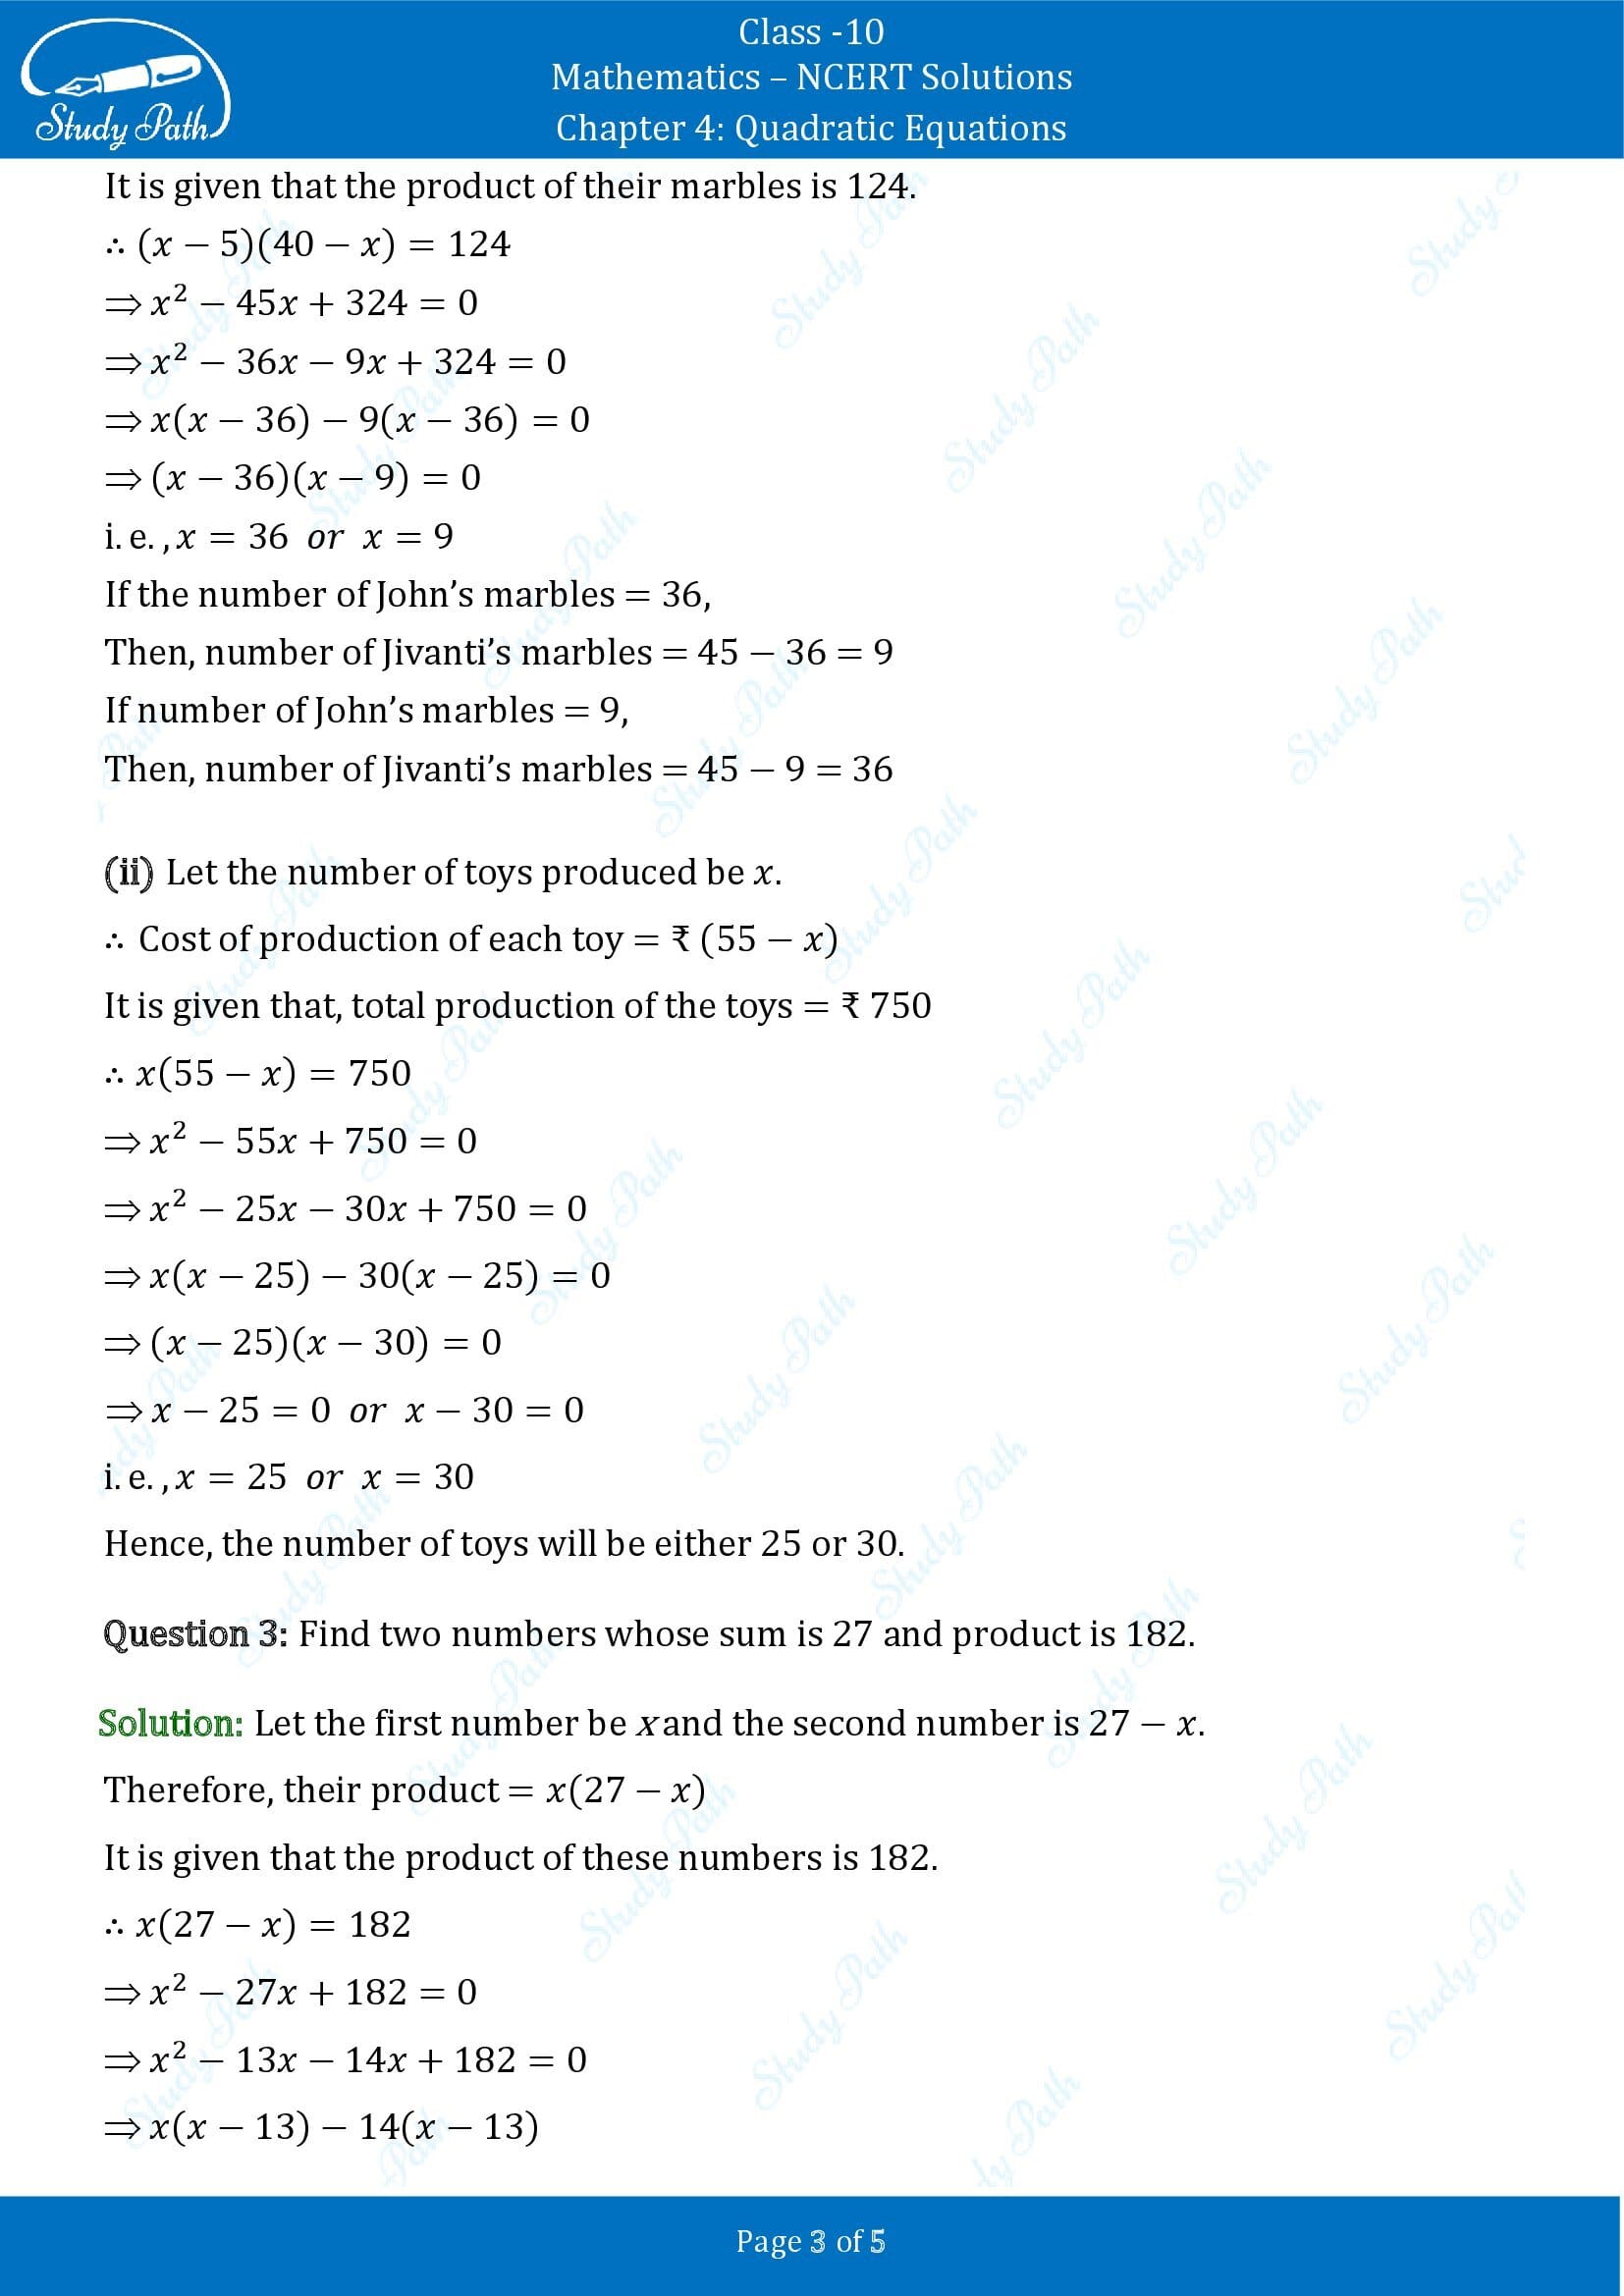 NCERT Solutions for Class 10 Maths Chapter 4 Quadratic Equations Exercise 4.2 00003